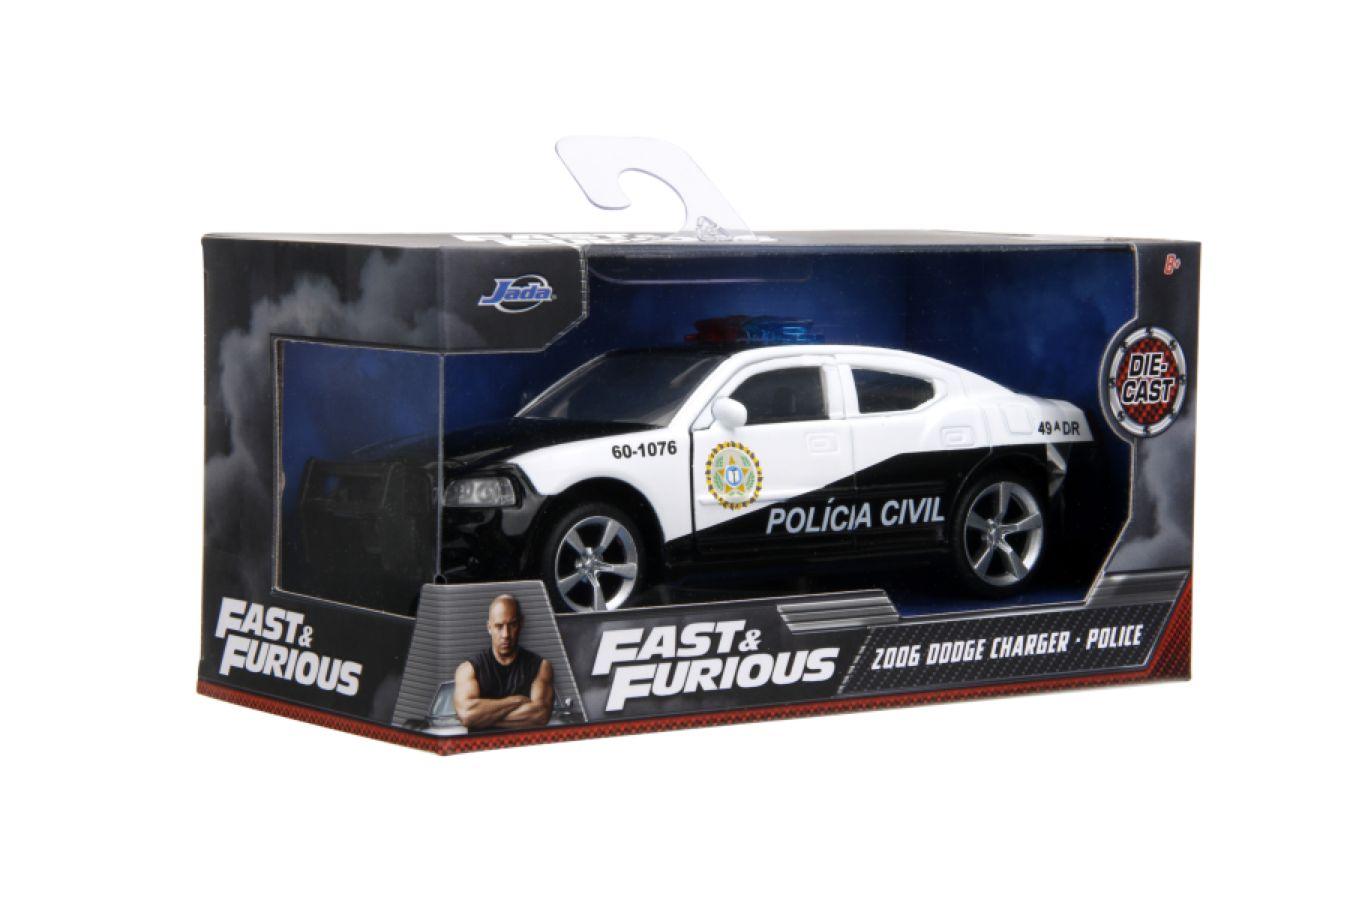 Fast & Furious 5 - Dodge Charger Police Car 1:32 Scale Hollywood Rides Diecast Vehicle Jada Toys Titan Pop Culture